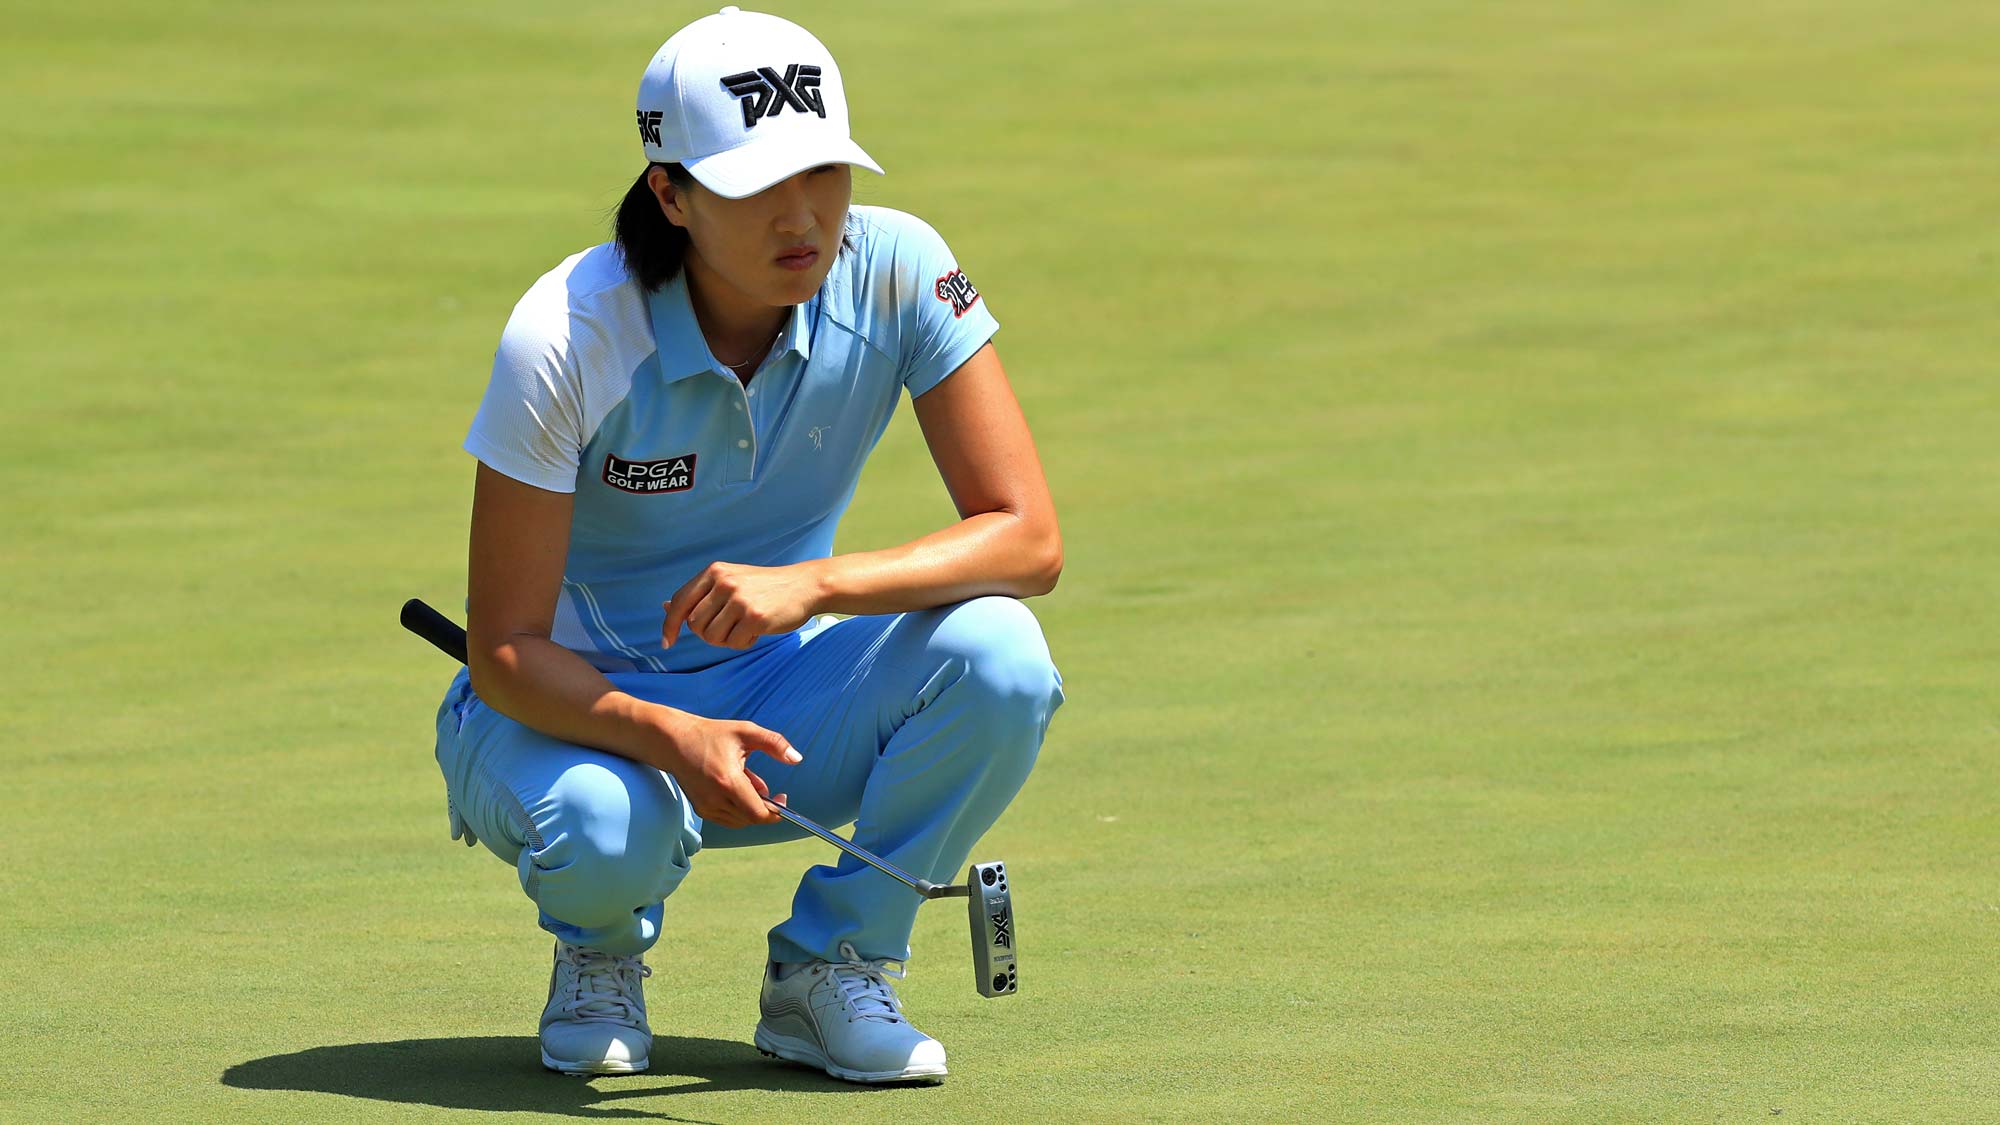 Jennifer Song lines up her putt on the ninth hole during the second round of the Pure Silk Championship 